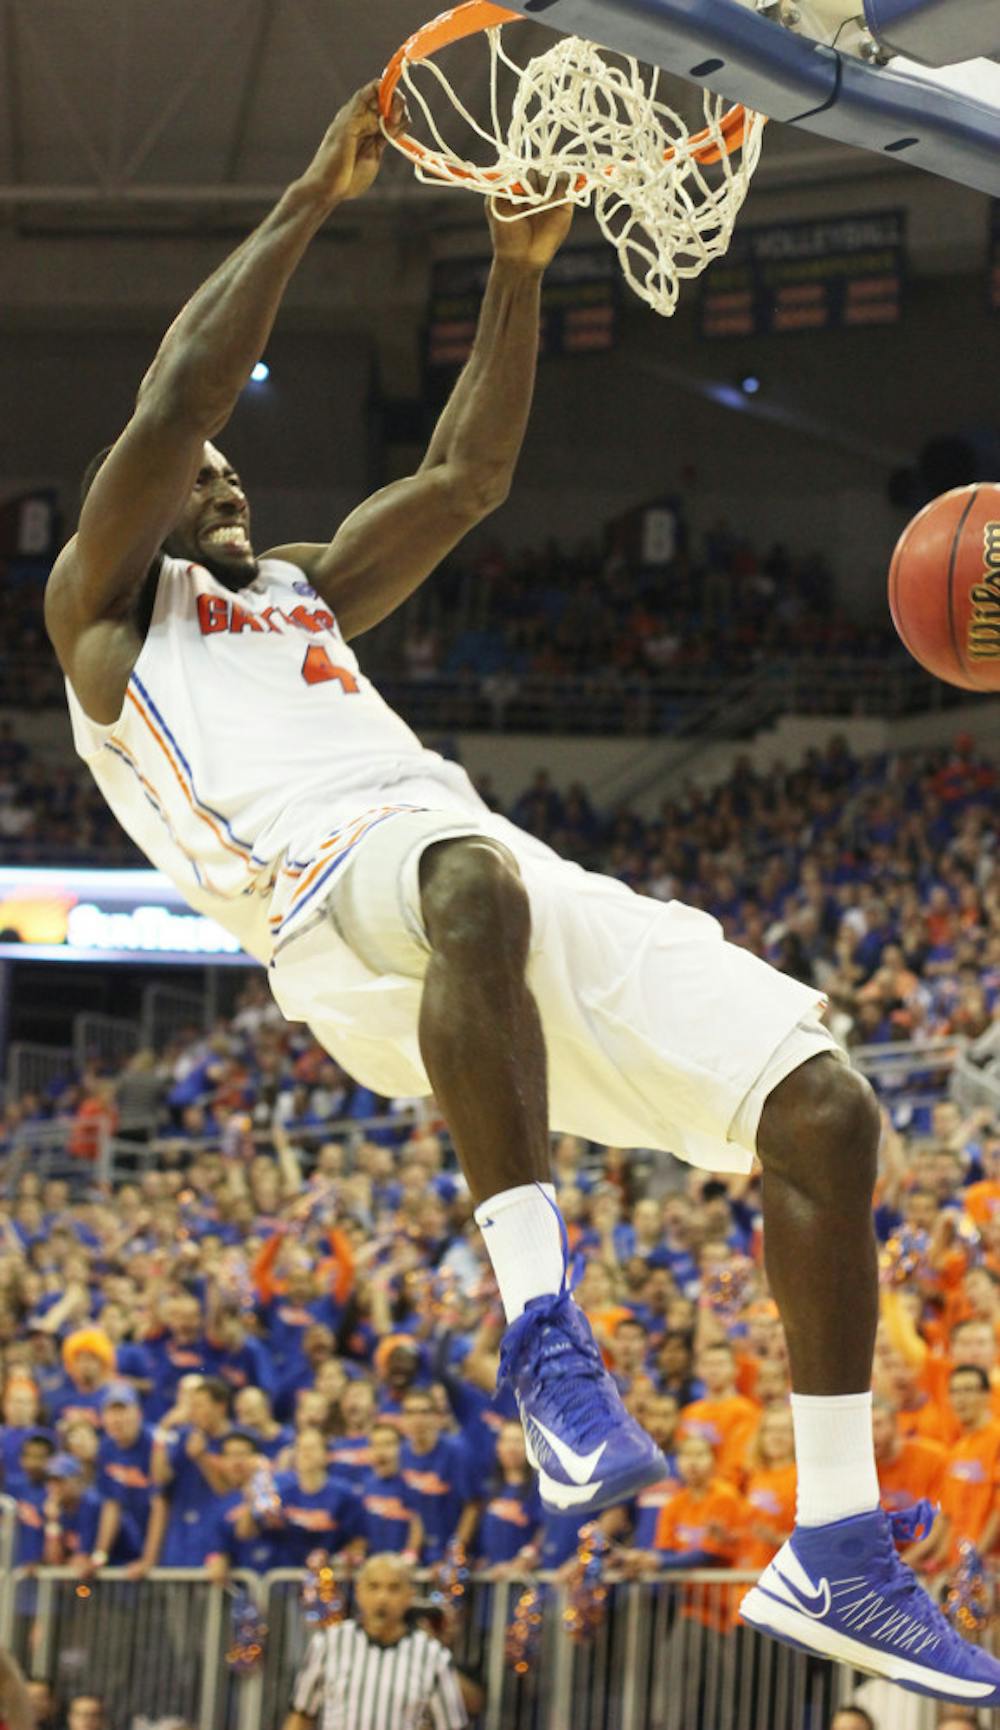 <p>Junior center Patric Young dunks during Florida’s 83-52 victory against Missouri on Jan. 19 in the O’Connell Center. Young scored 14 points in Florida's  71-54 victory against Arkansas on Saturday in the O'Connell Center. </p>